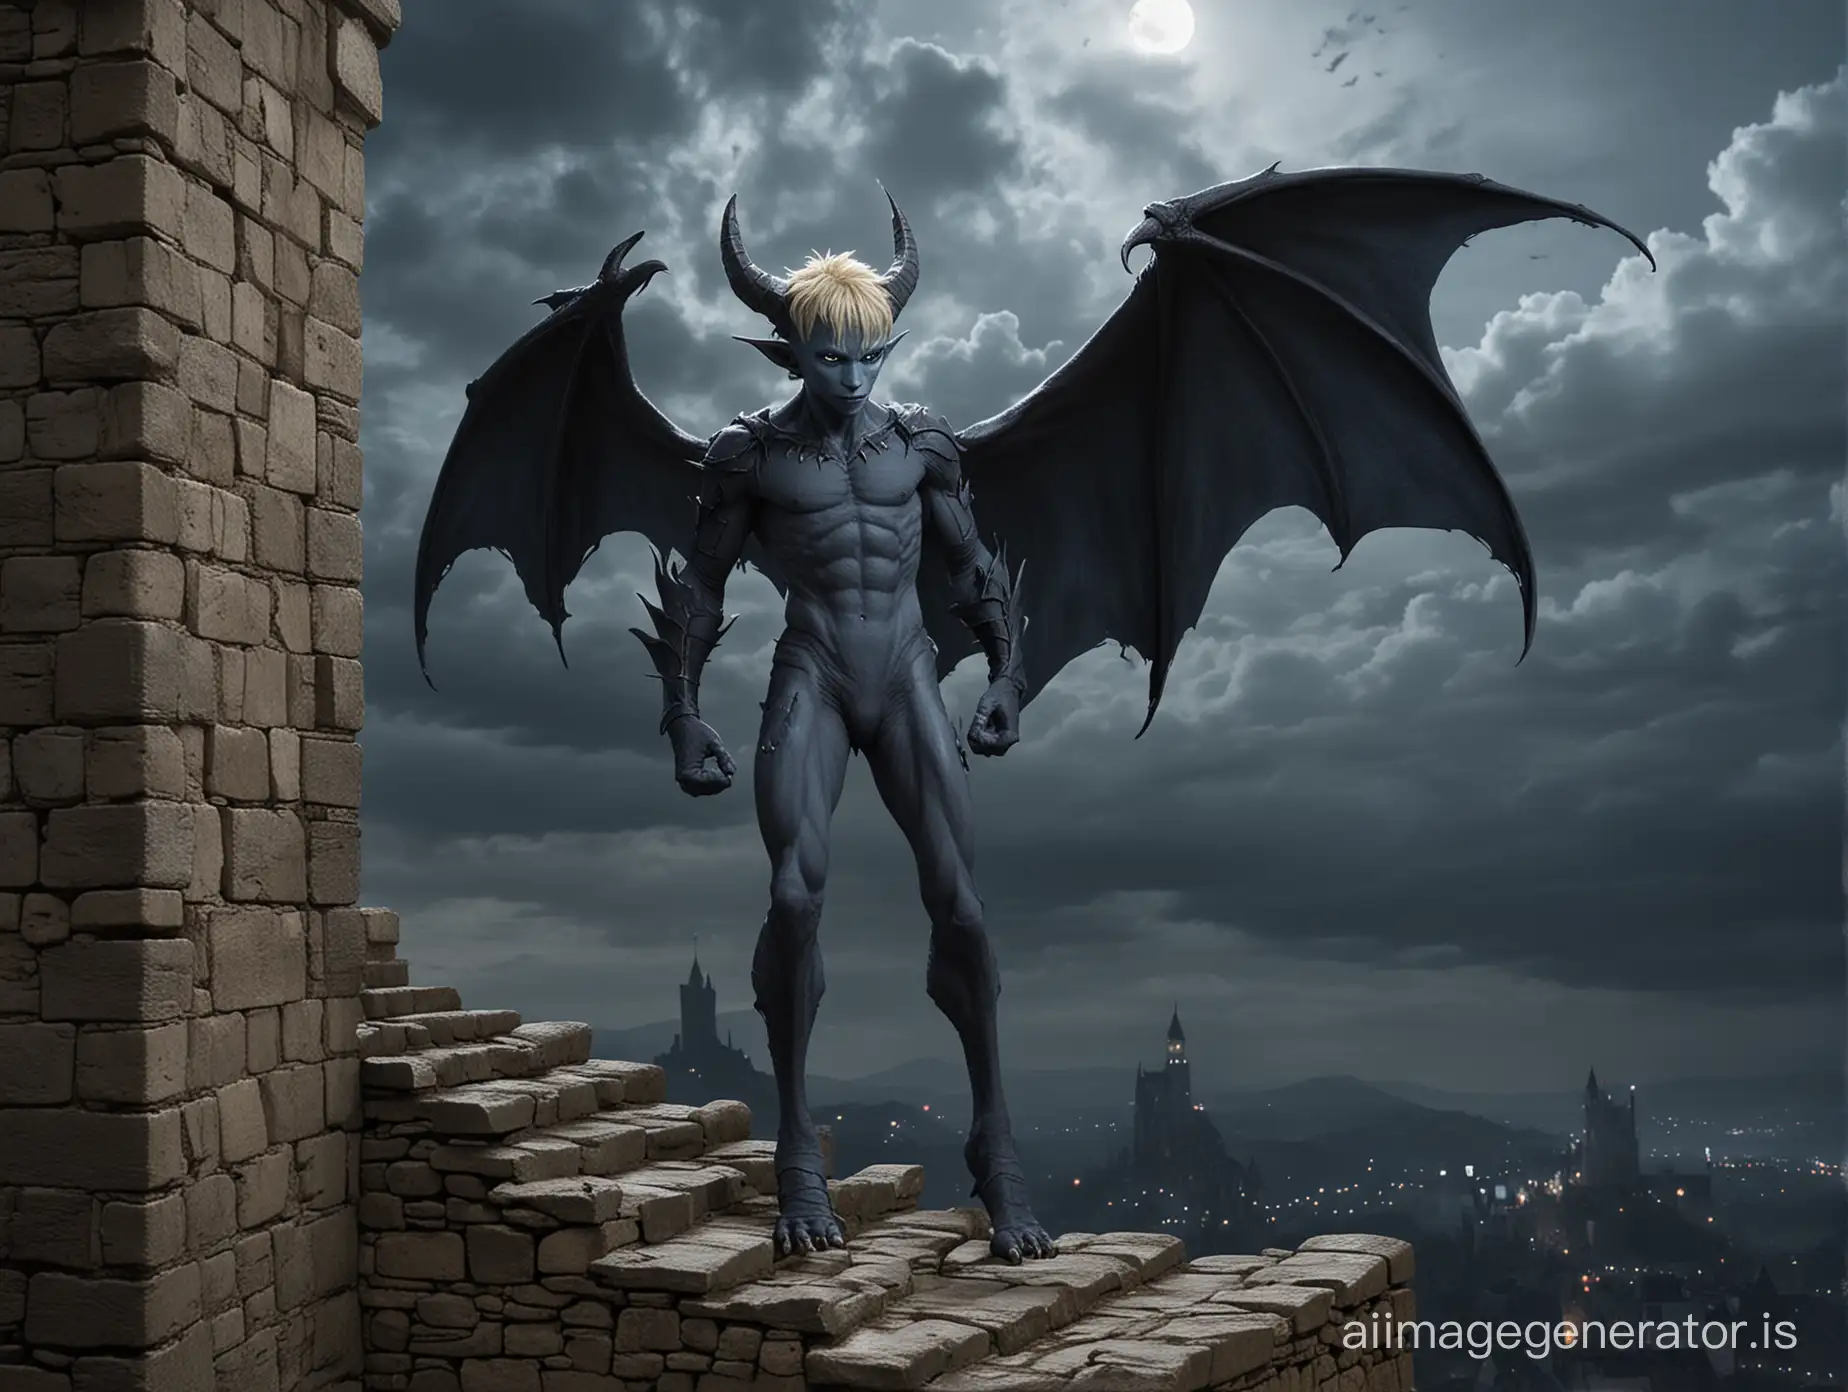 Sinister-Demon-Boy-with-BatLike-Wings-on-Castle-Battlements-at-Night